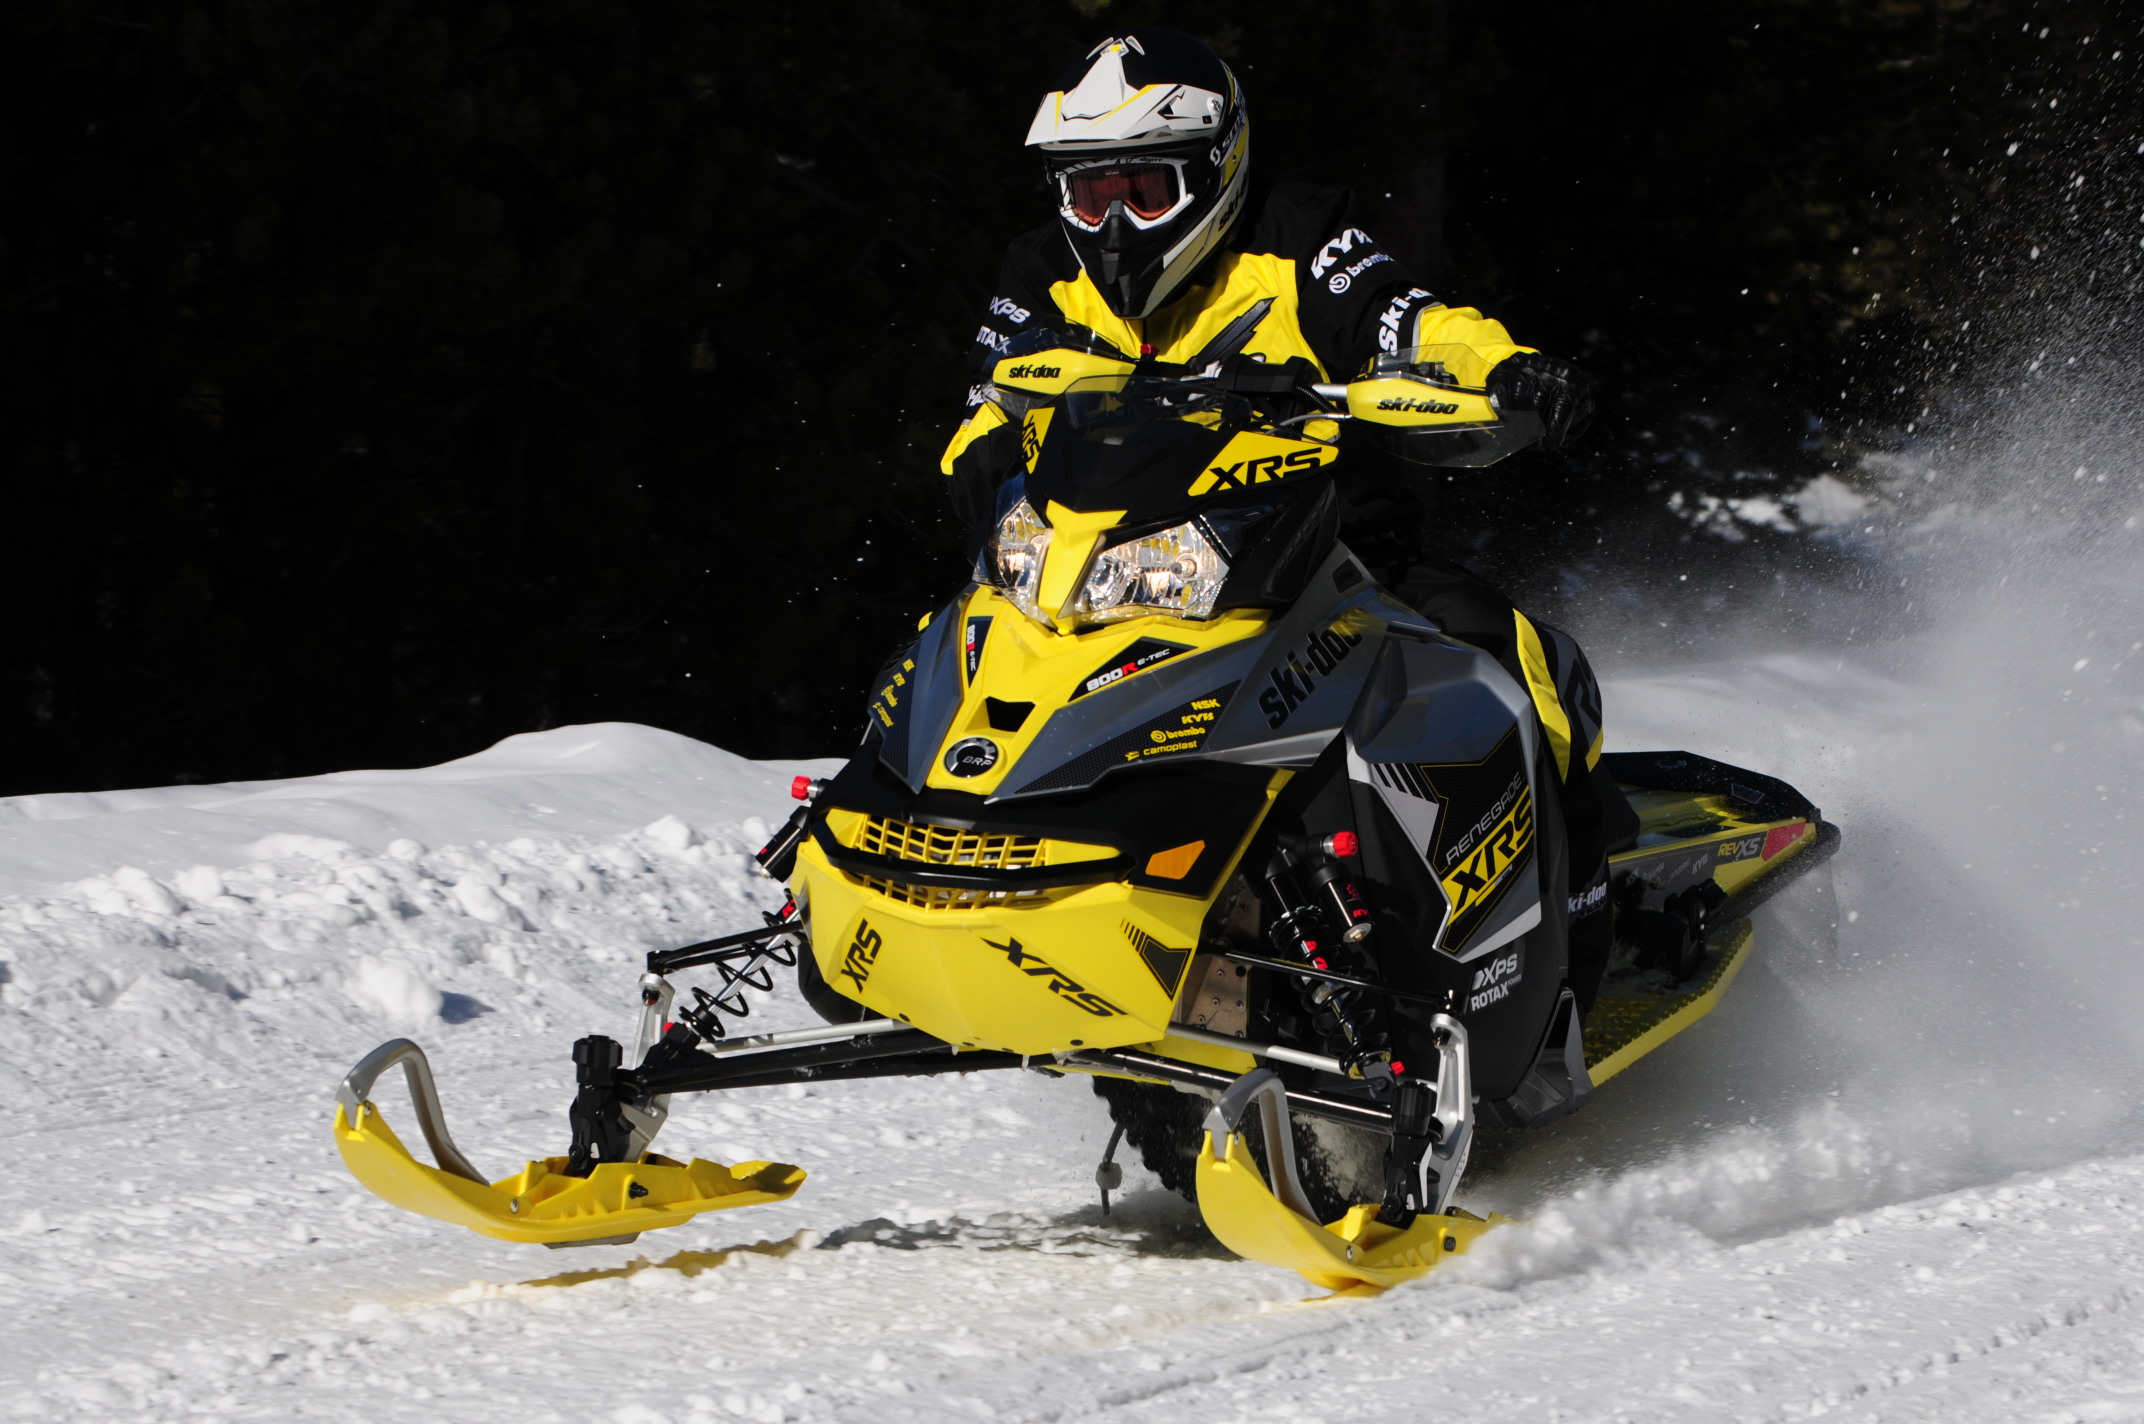 2016 SKI-DOOs with STEVE COWING and SNOW GOER CANADA / SNOWMOBILER TV